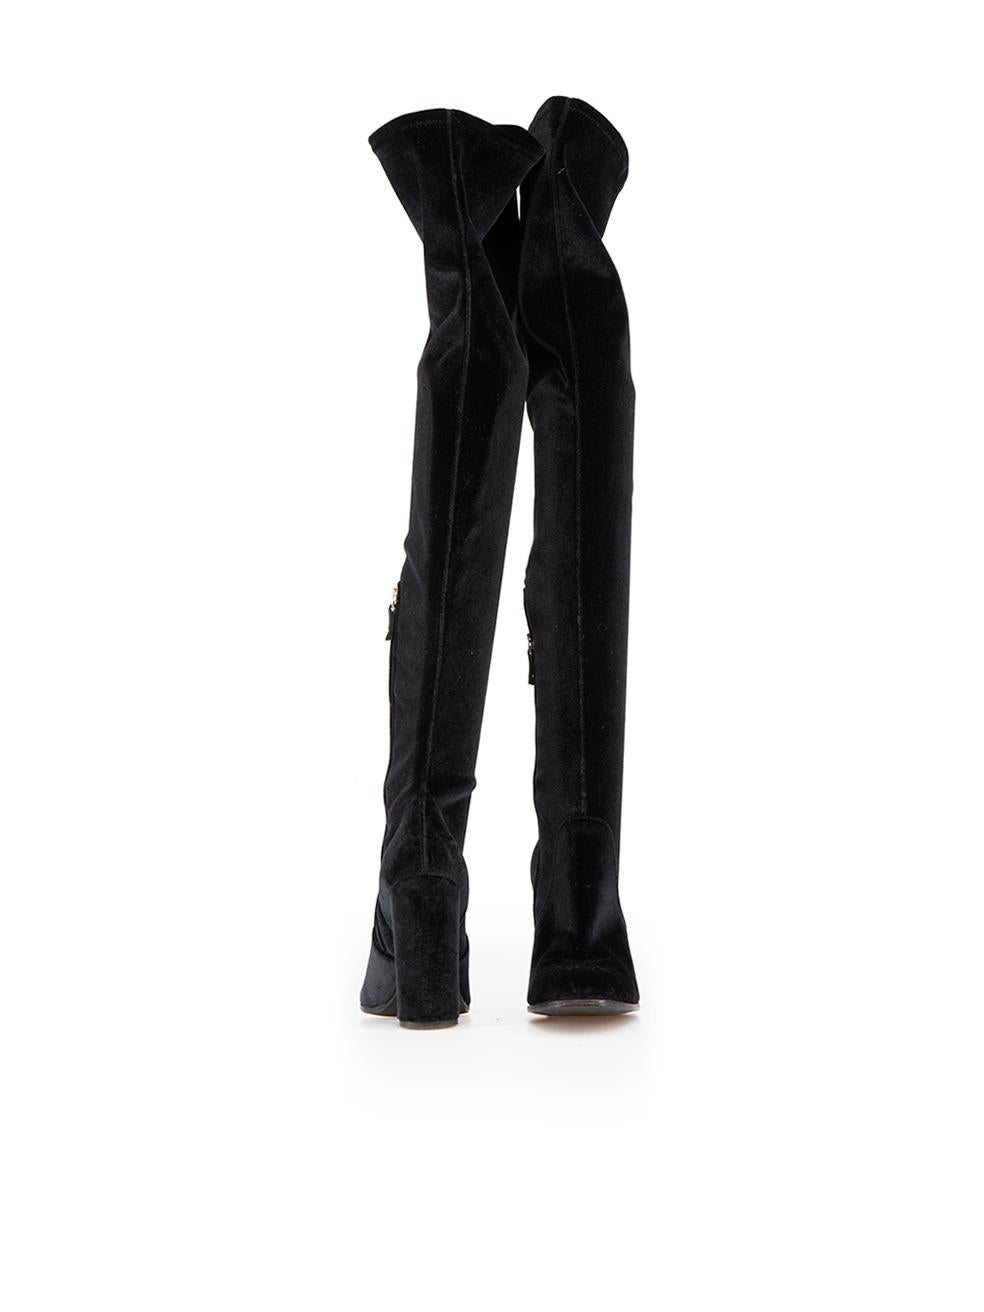 Ermanno Scervino Black Velvet Thigh High Boots Size IT 37 In Good Condition For Sale In London, GB